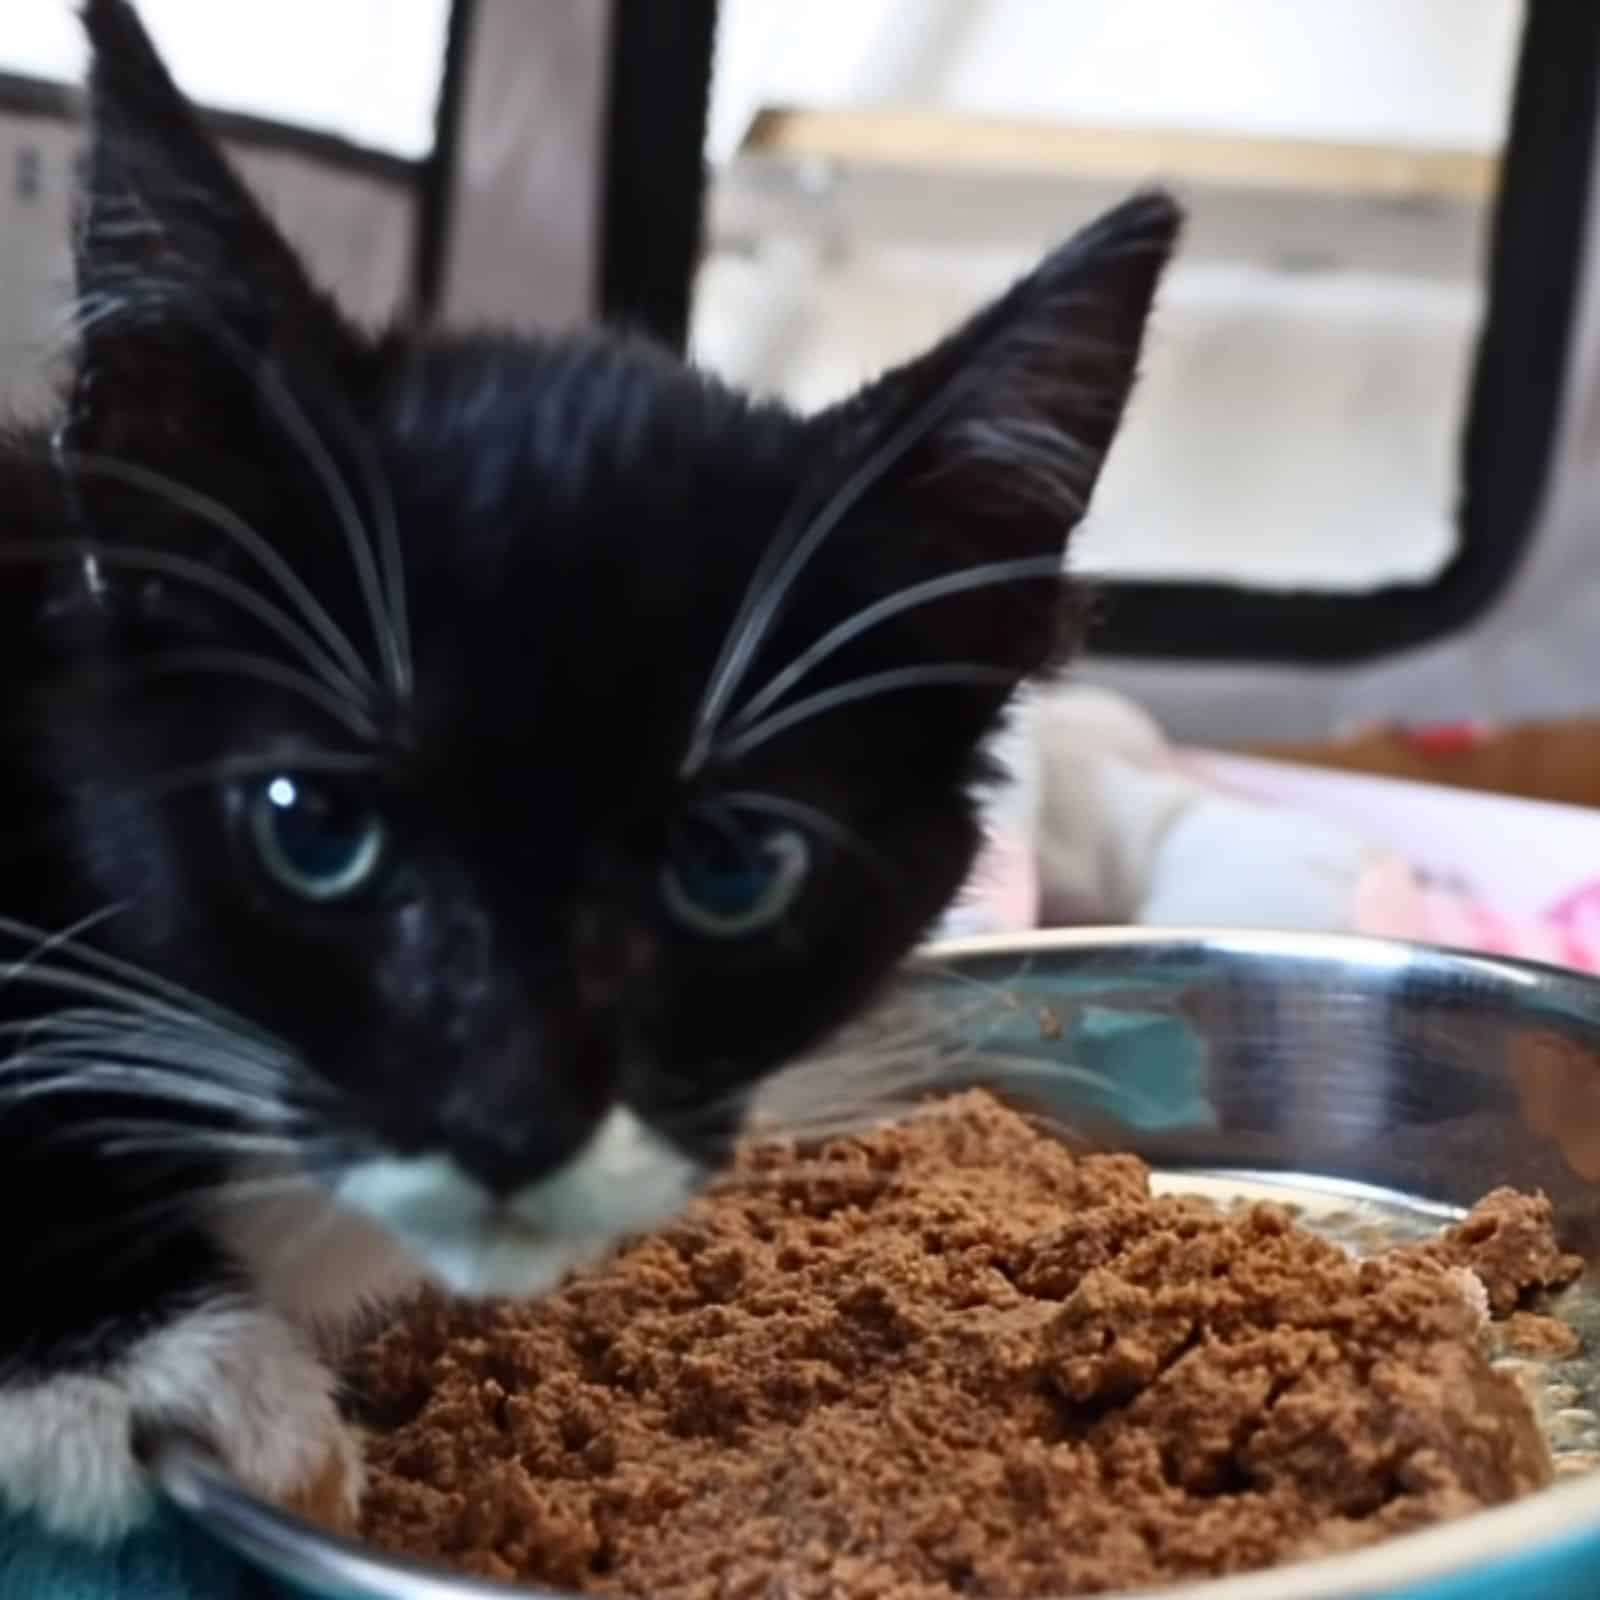 close-up photo of kitten and food bowl